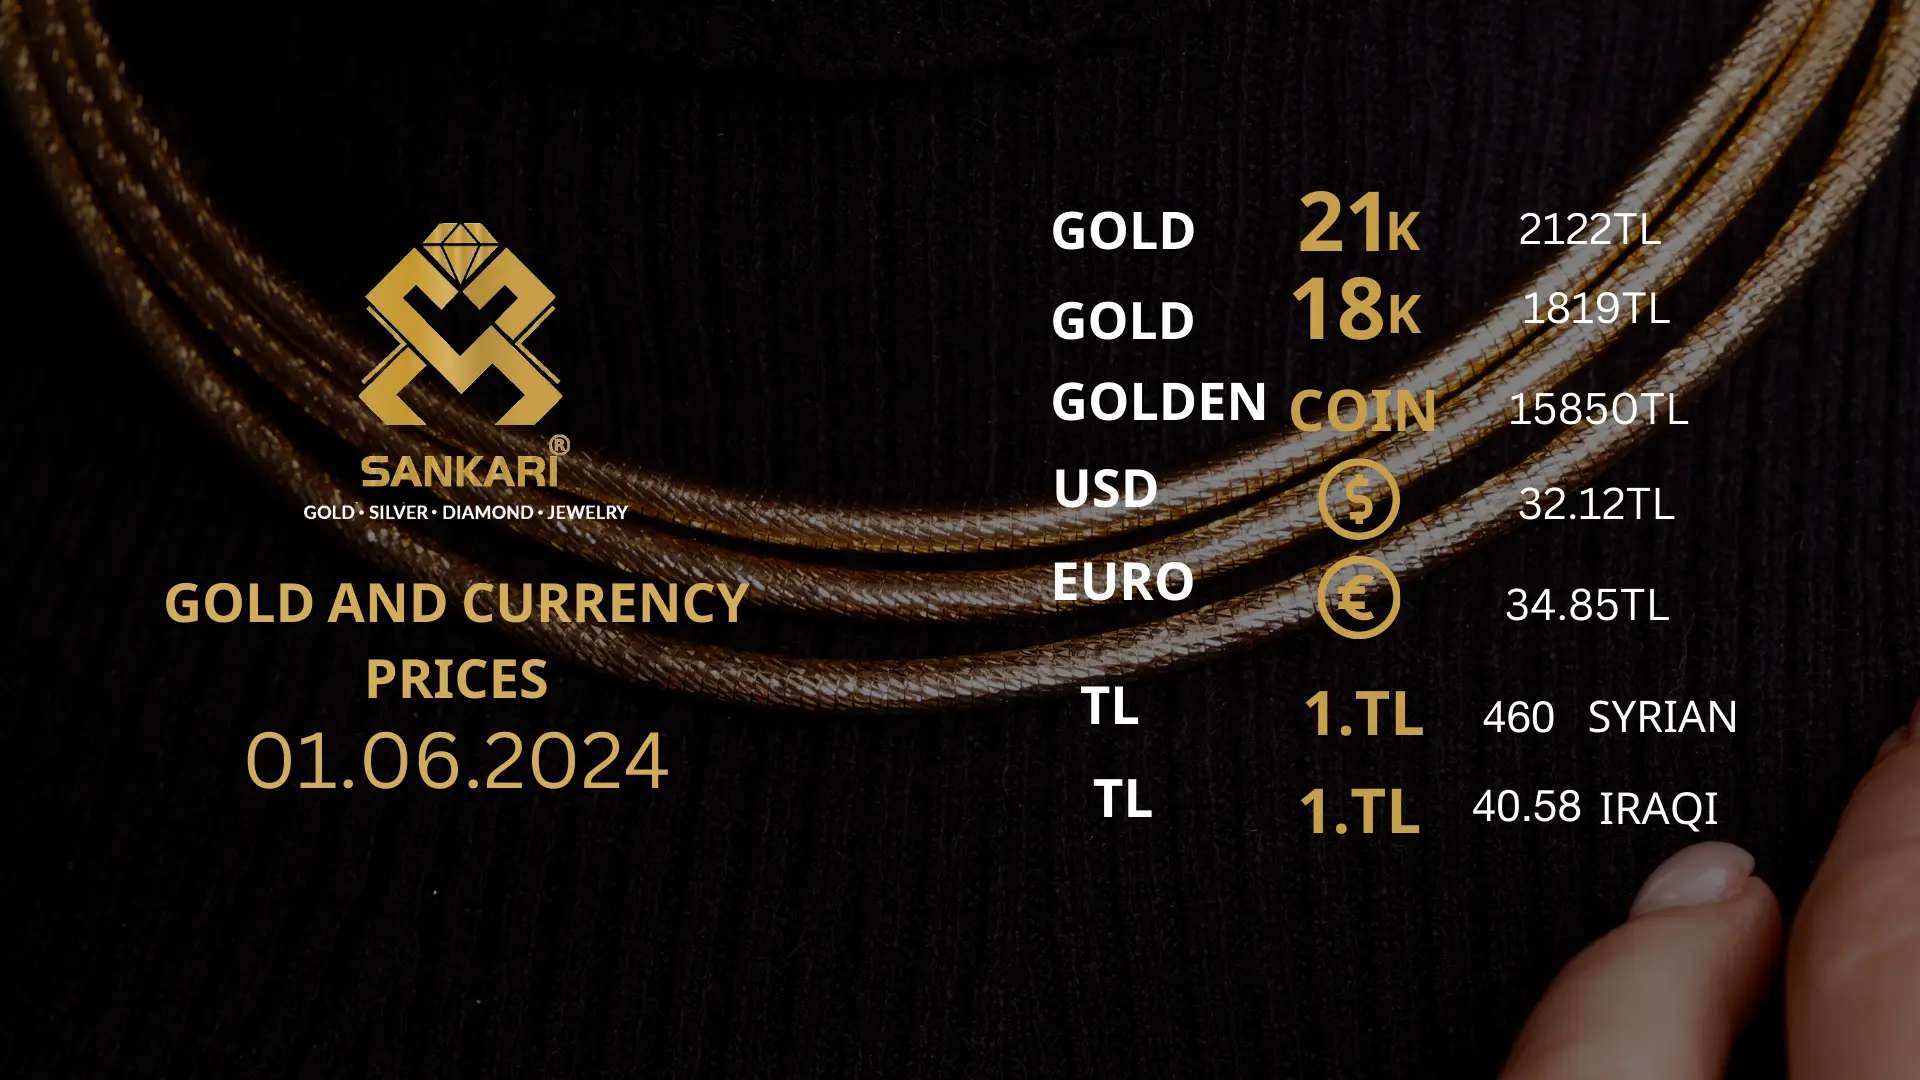 gold price today Saturday 01-06-2024